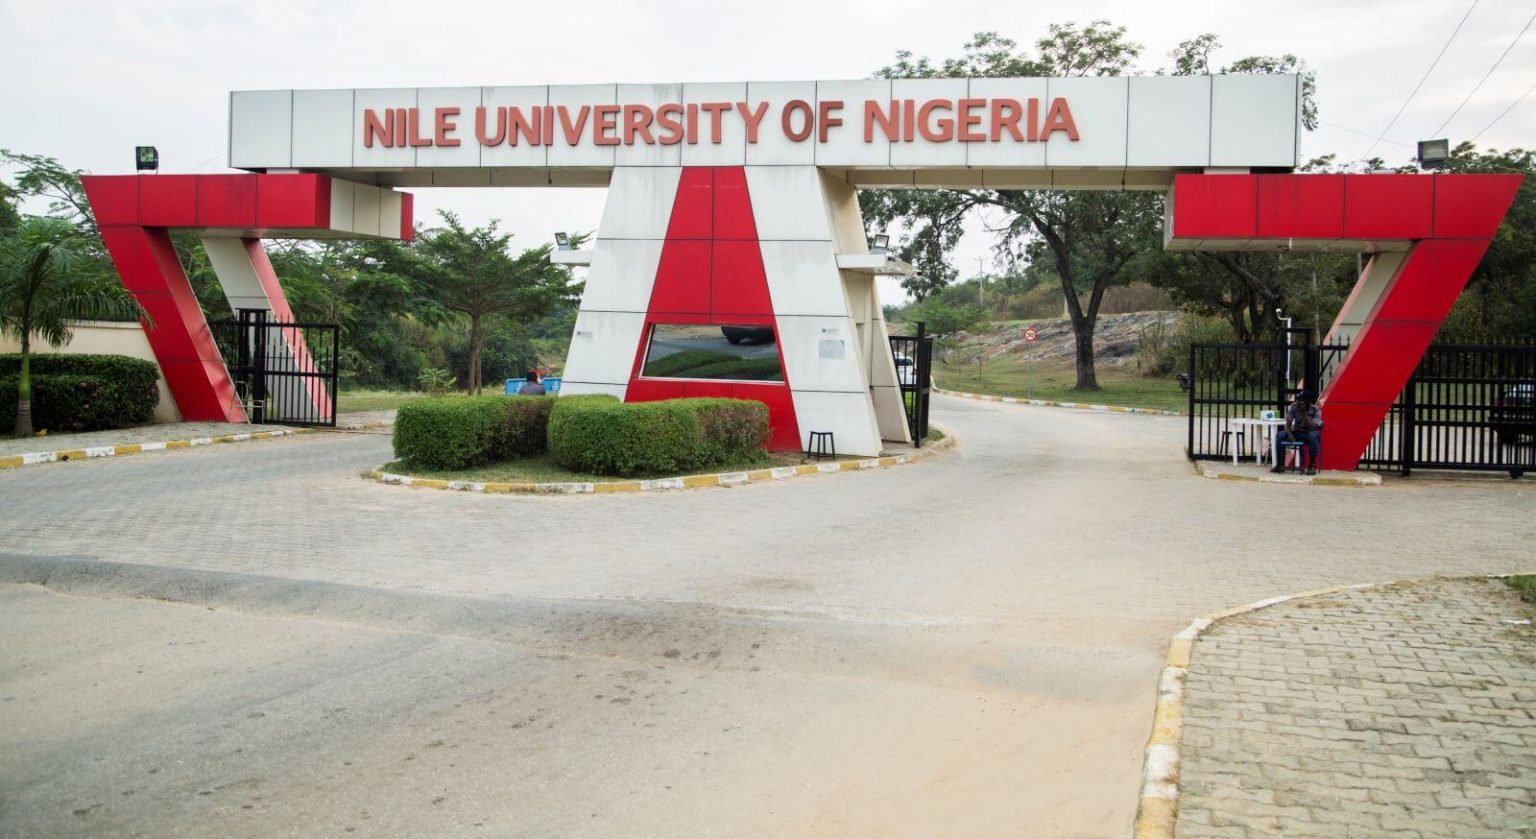 Nile University of Nigeria Graduates 84 Students with First-Class Degrees